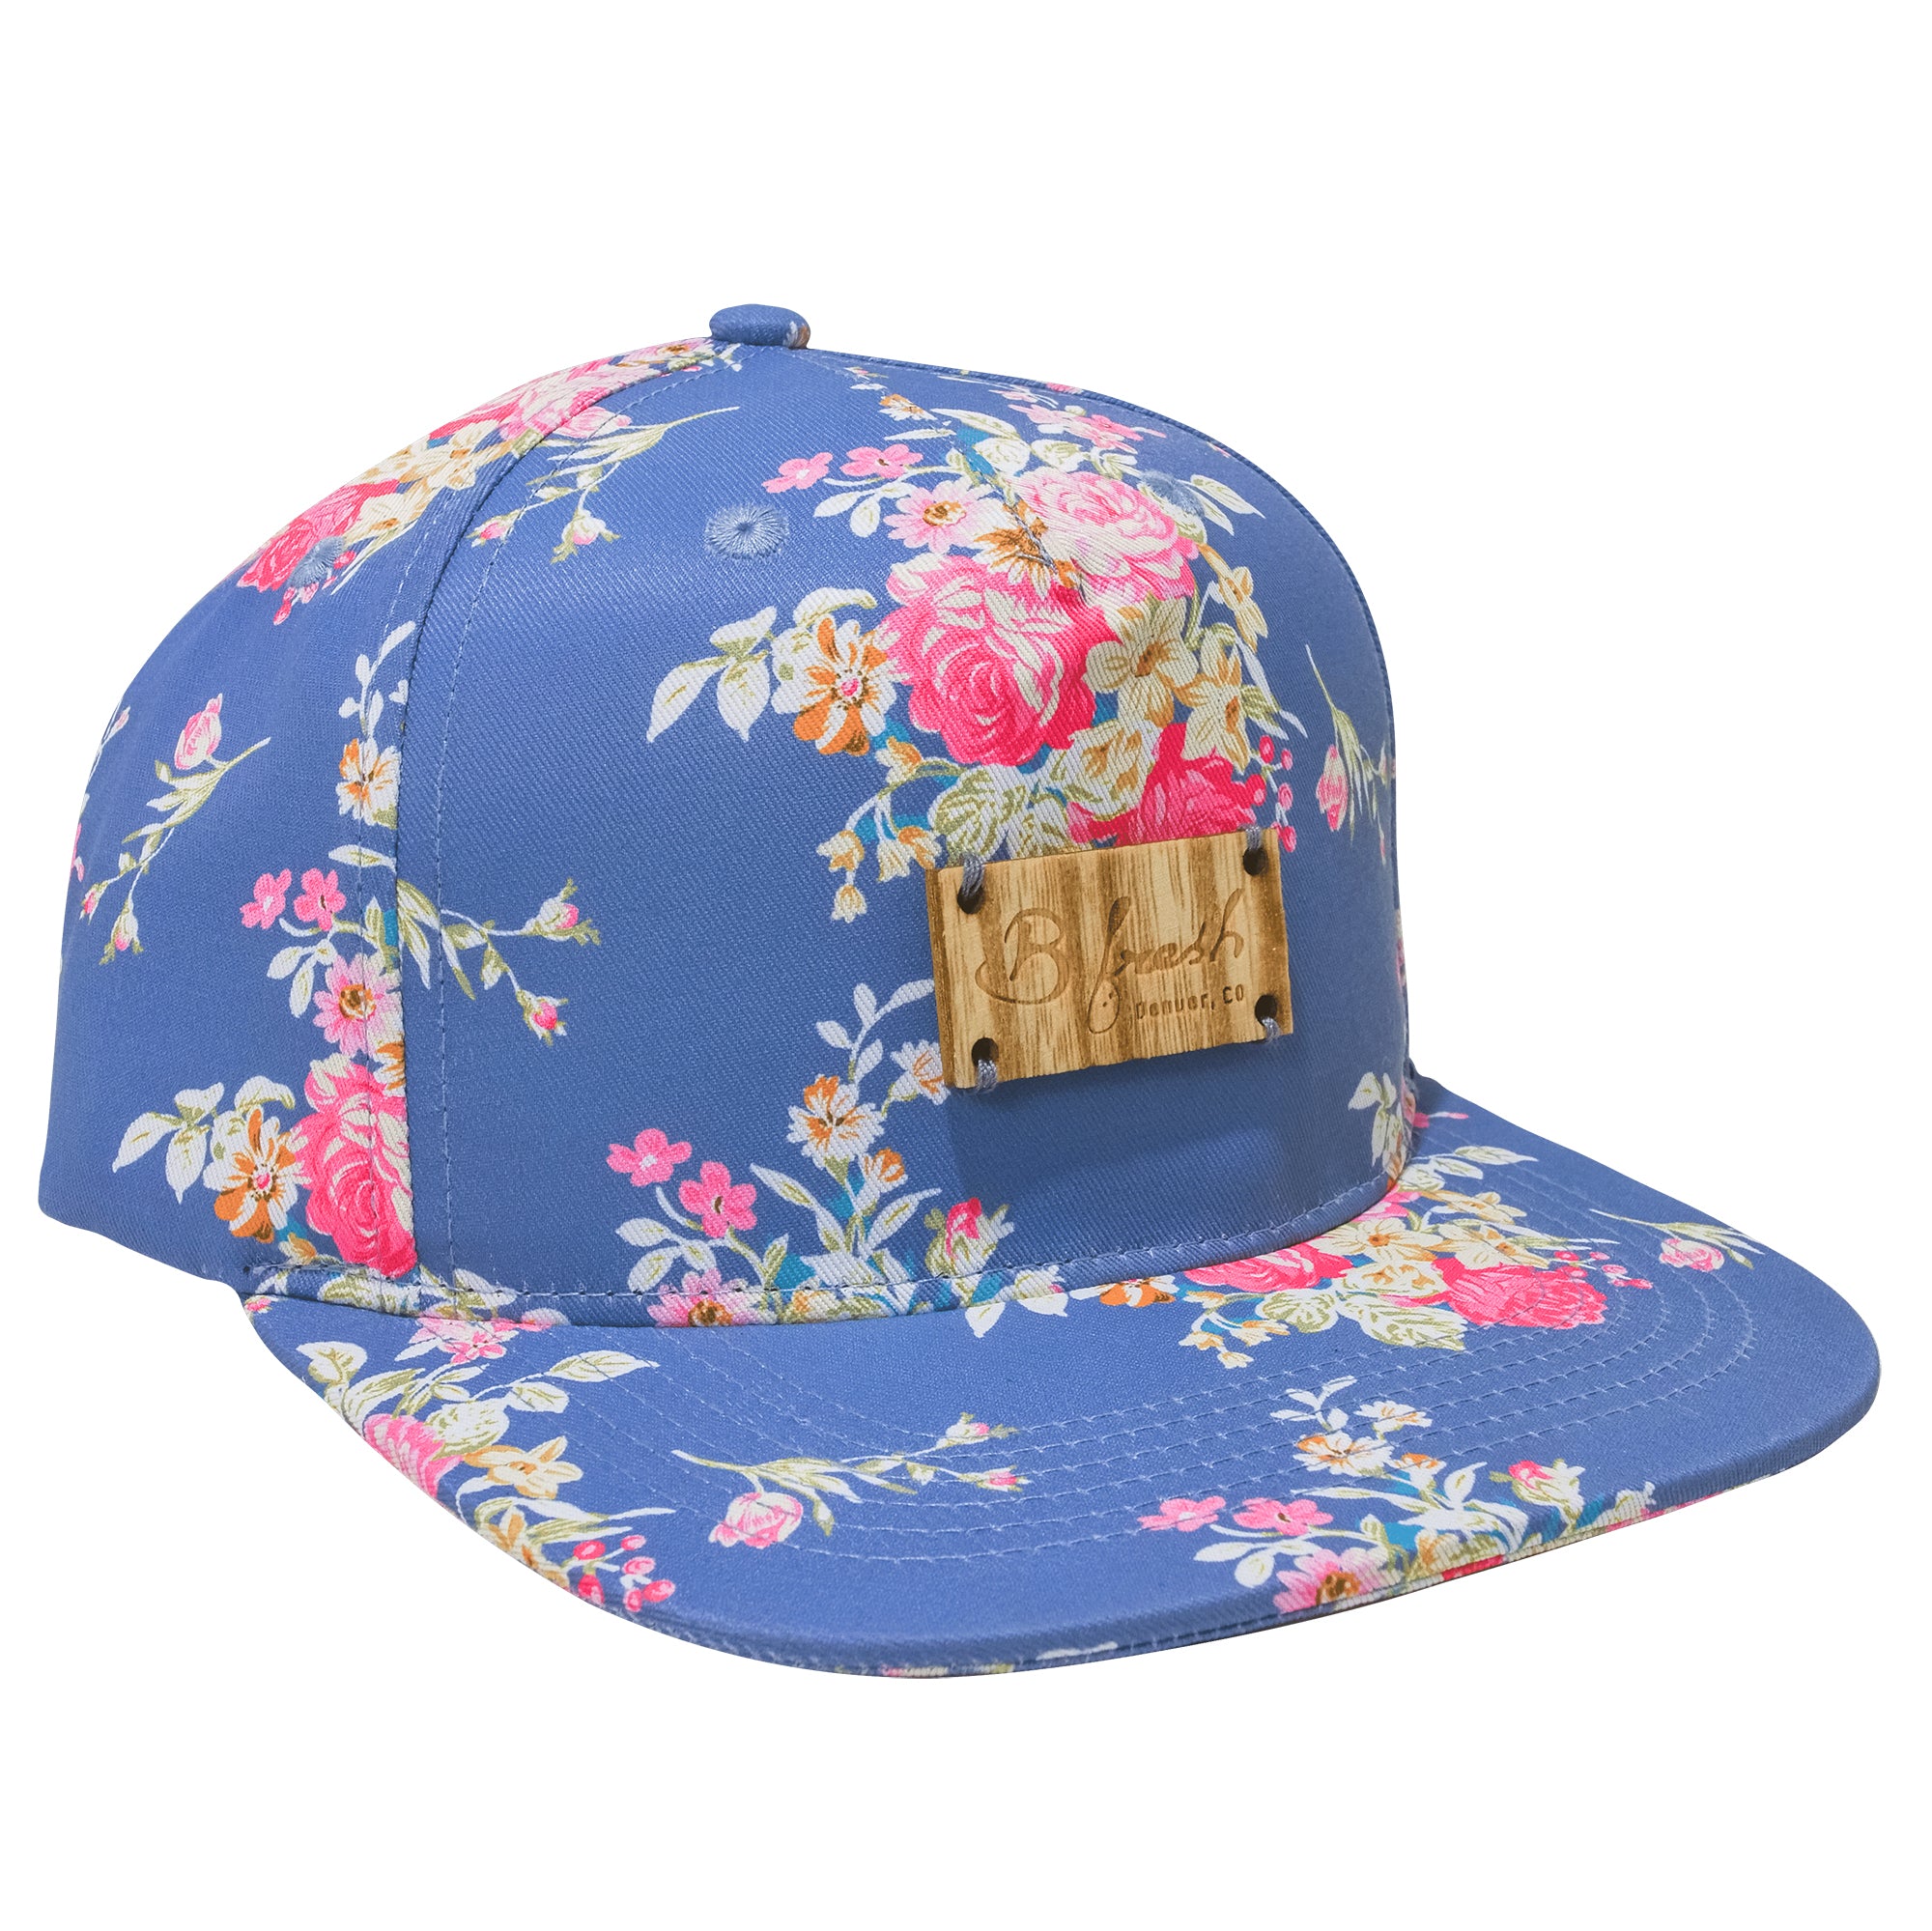 Grandmas Couch Vintage Floral 80s 90s Throwback Retro Hat Wooden Label. B Fresh Gear.